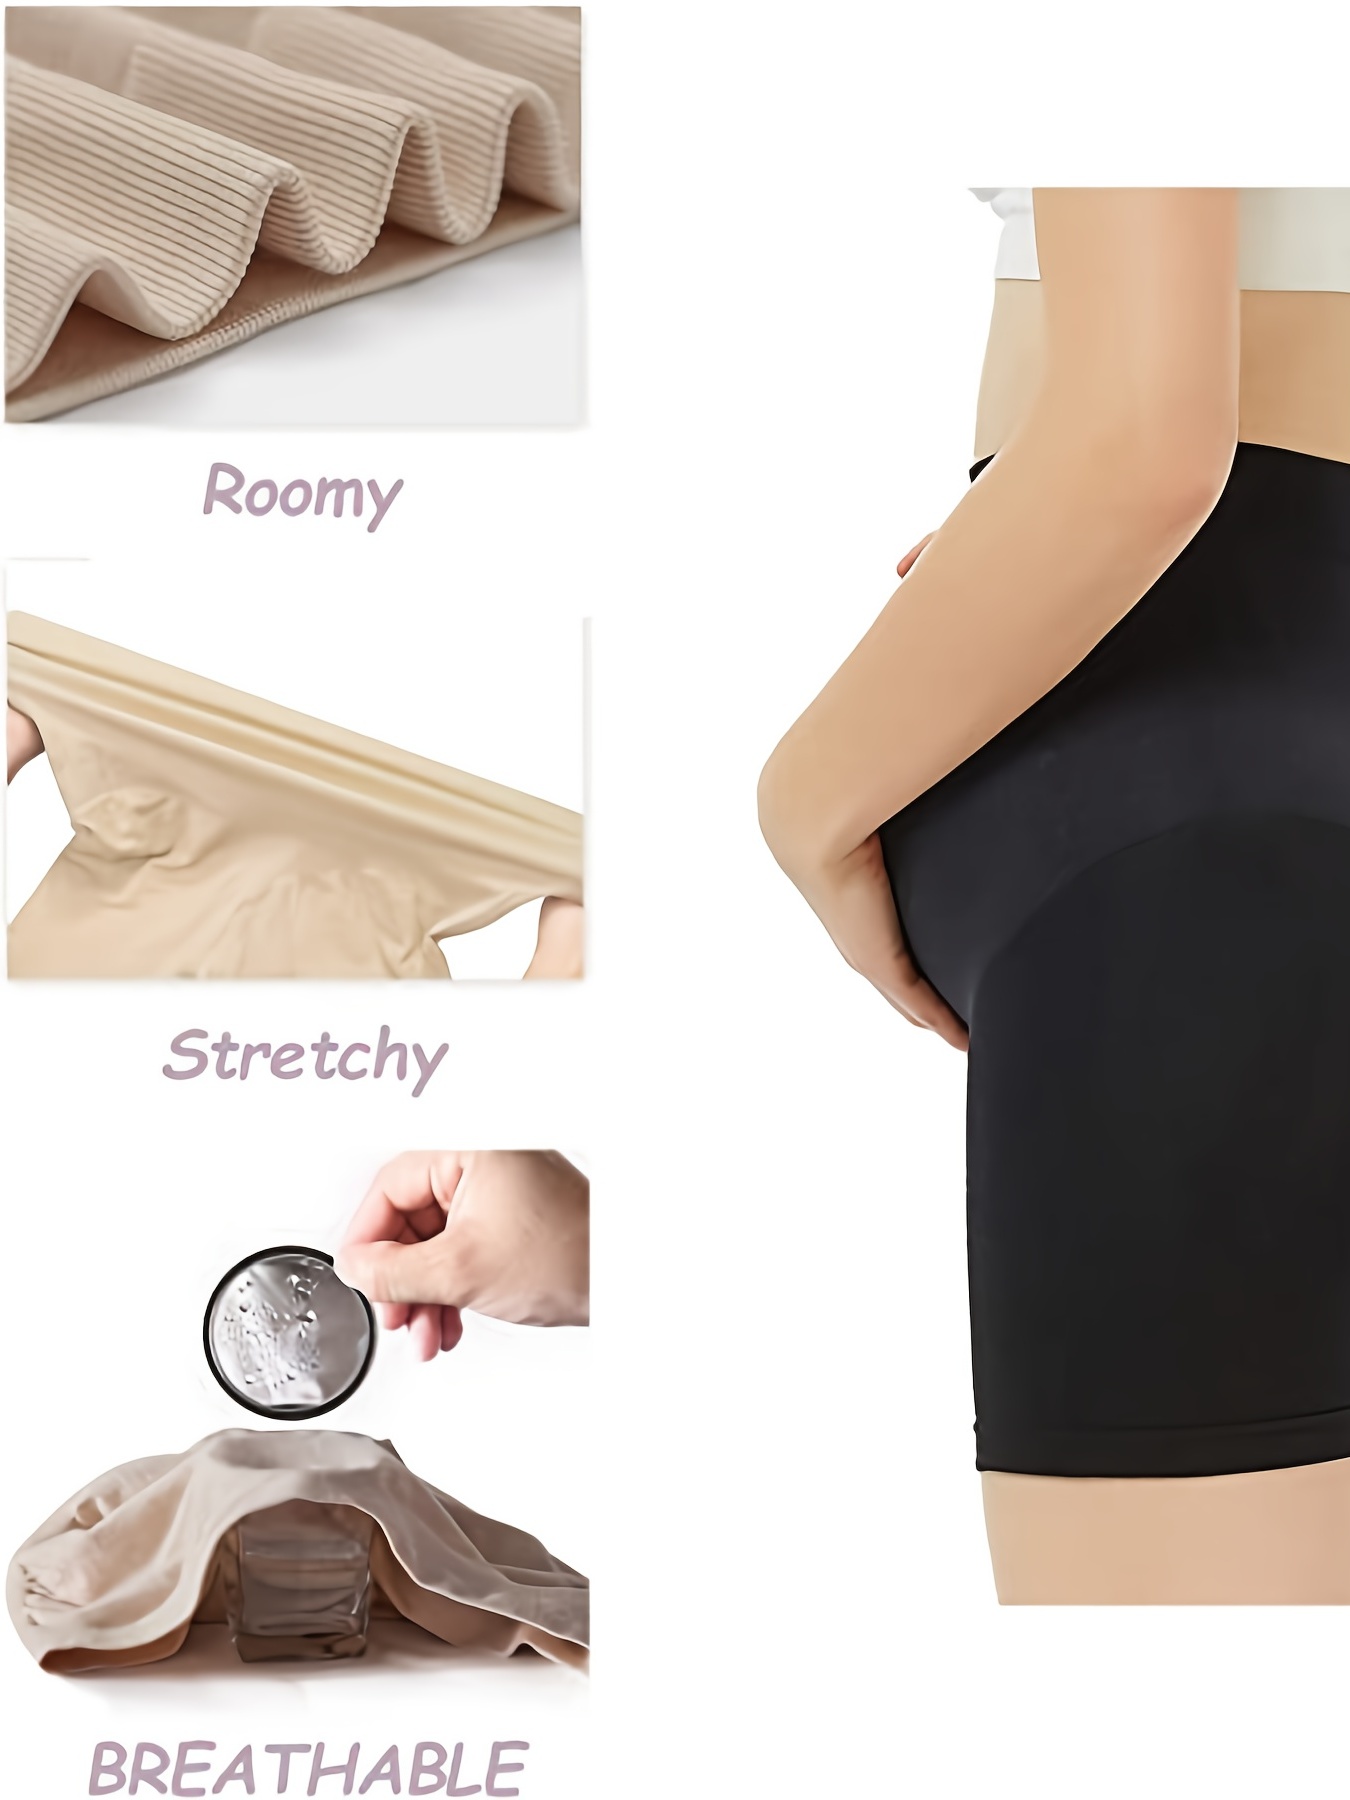 Maternity Shapewear for Dresses Women's Soft and Seamless Pregnancy  Underwear Prevent Chaffing 